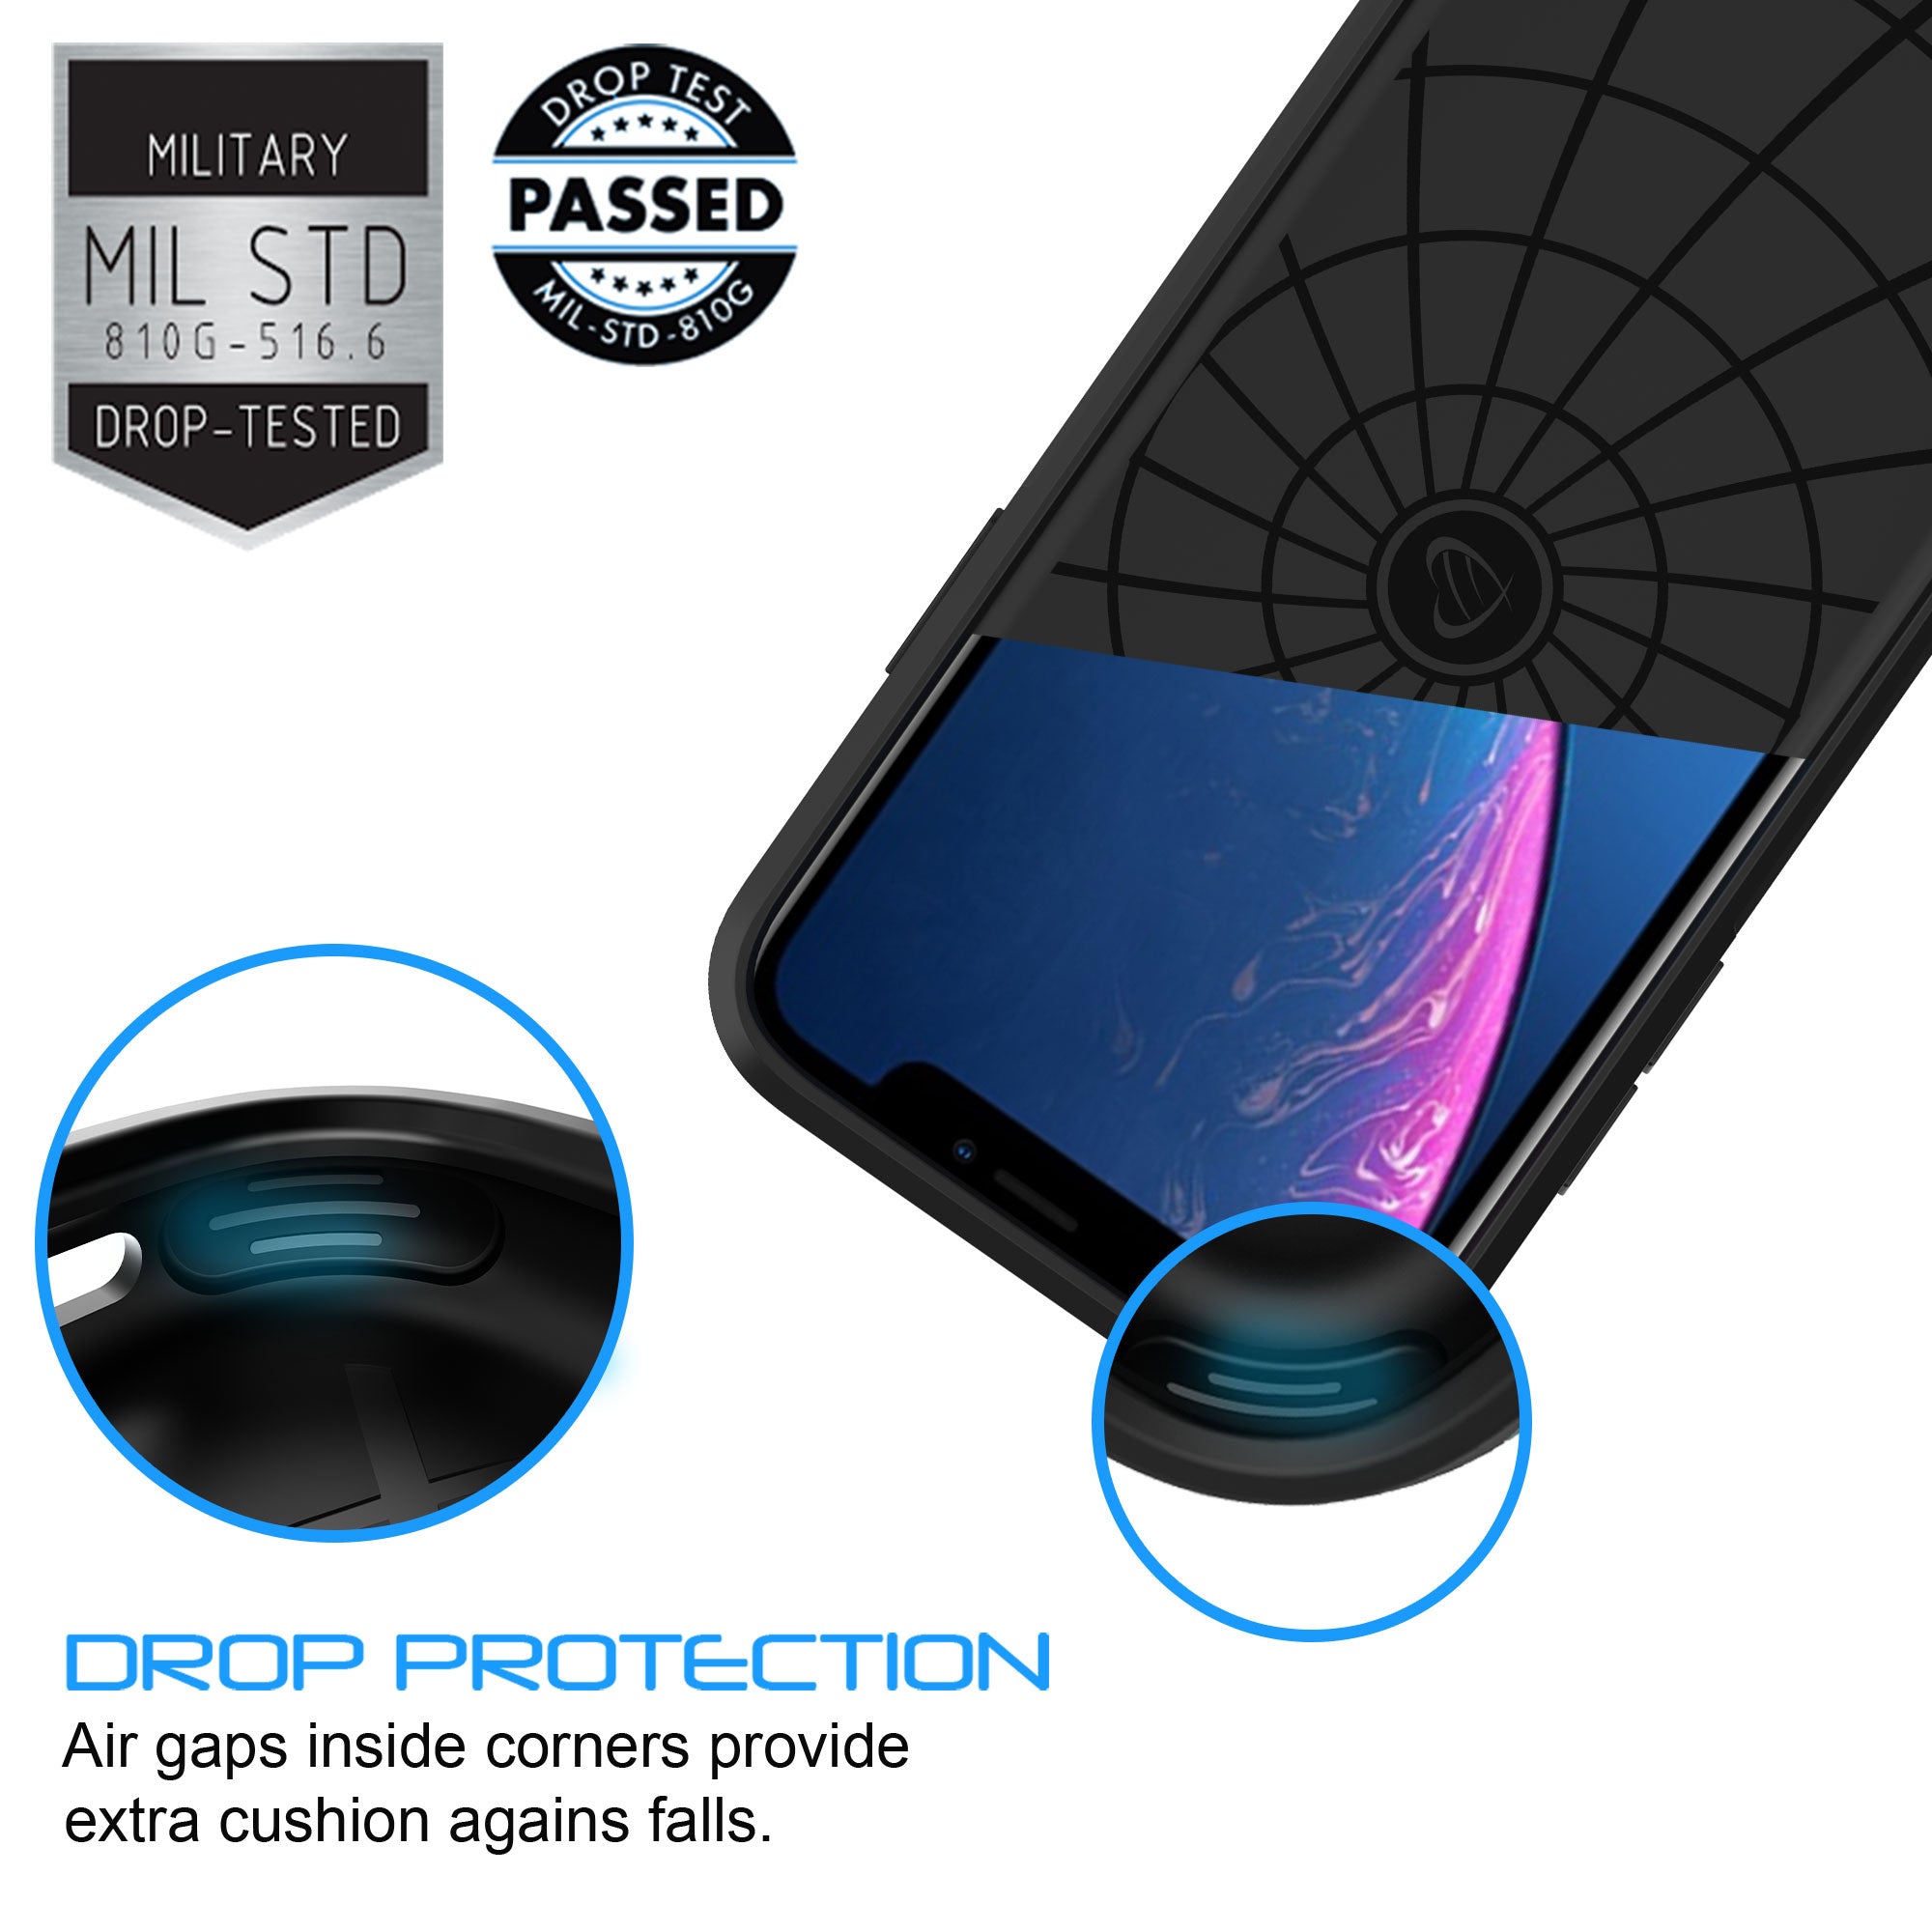 Luvvitt Ultra Armor Case and Liquid Glass Screen Protector Bundle for iPhone 11 Pro 2019 - Black